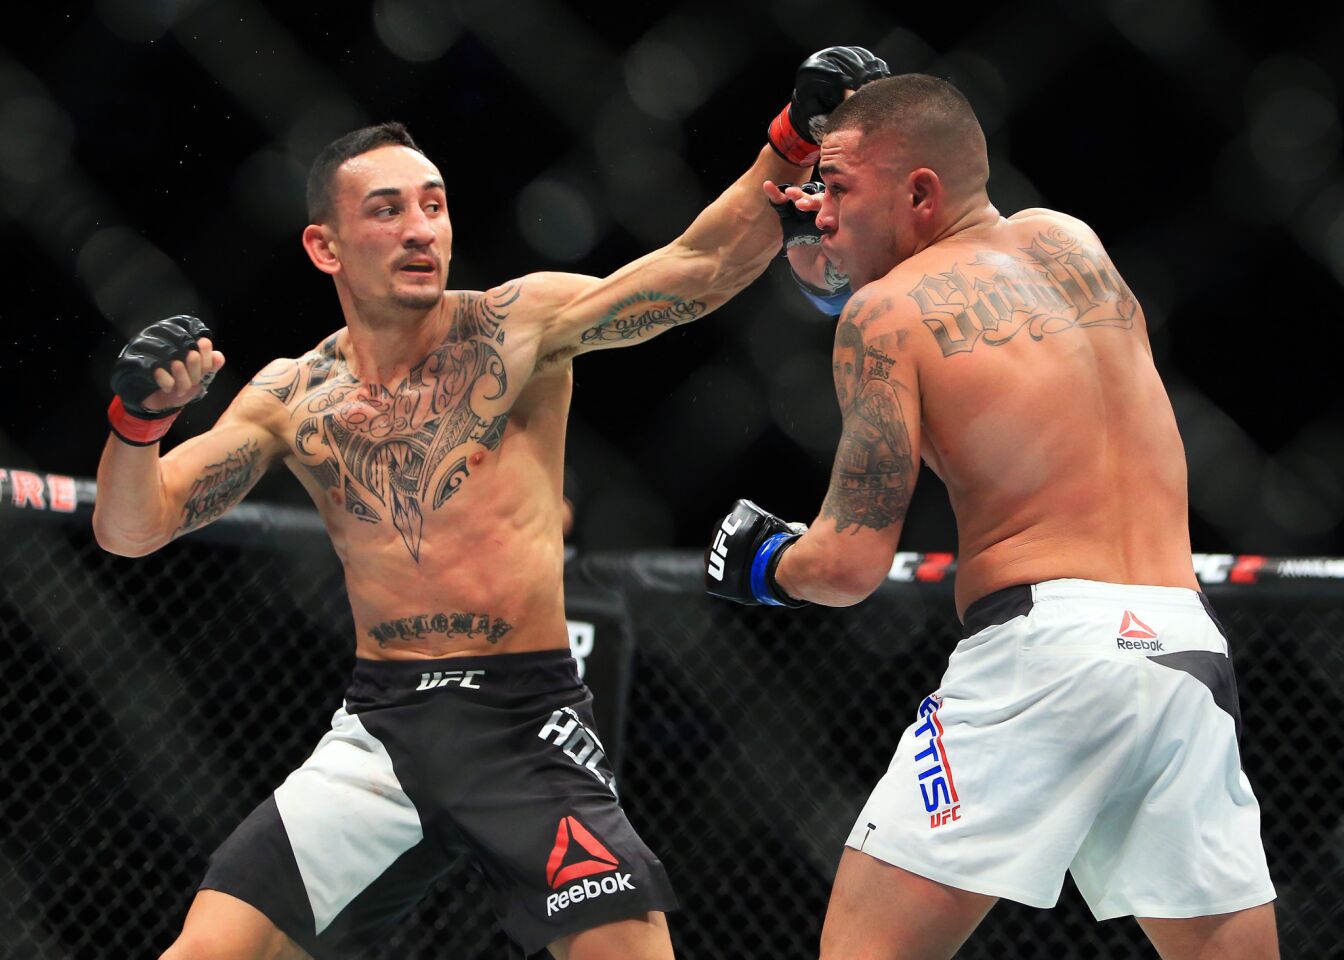 TORONTO, ON - DECEMBER 10: Max Holloway (L) of the United States fights Anthony Pettis (R) of the United States for the Interim Featherweight Title during the UFC 206 event at Air Canada Centre on December 10, 2016 in Toronto, Canada. (Photo by Vaughn Ridley/Getty Images) ** OUTS - ELSENT, FPG, CM - OUTS * NM, PH, VA if sourced by CT, LA or MoD **